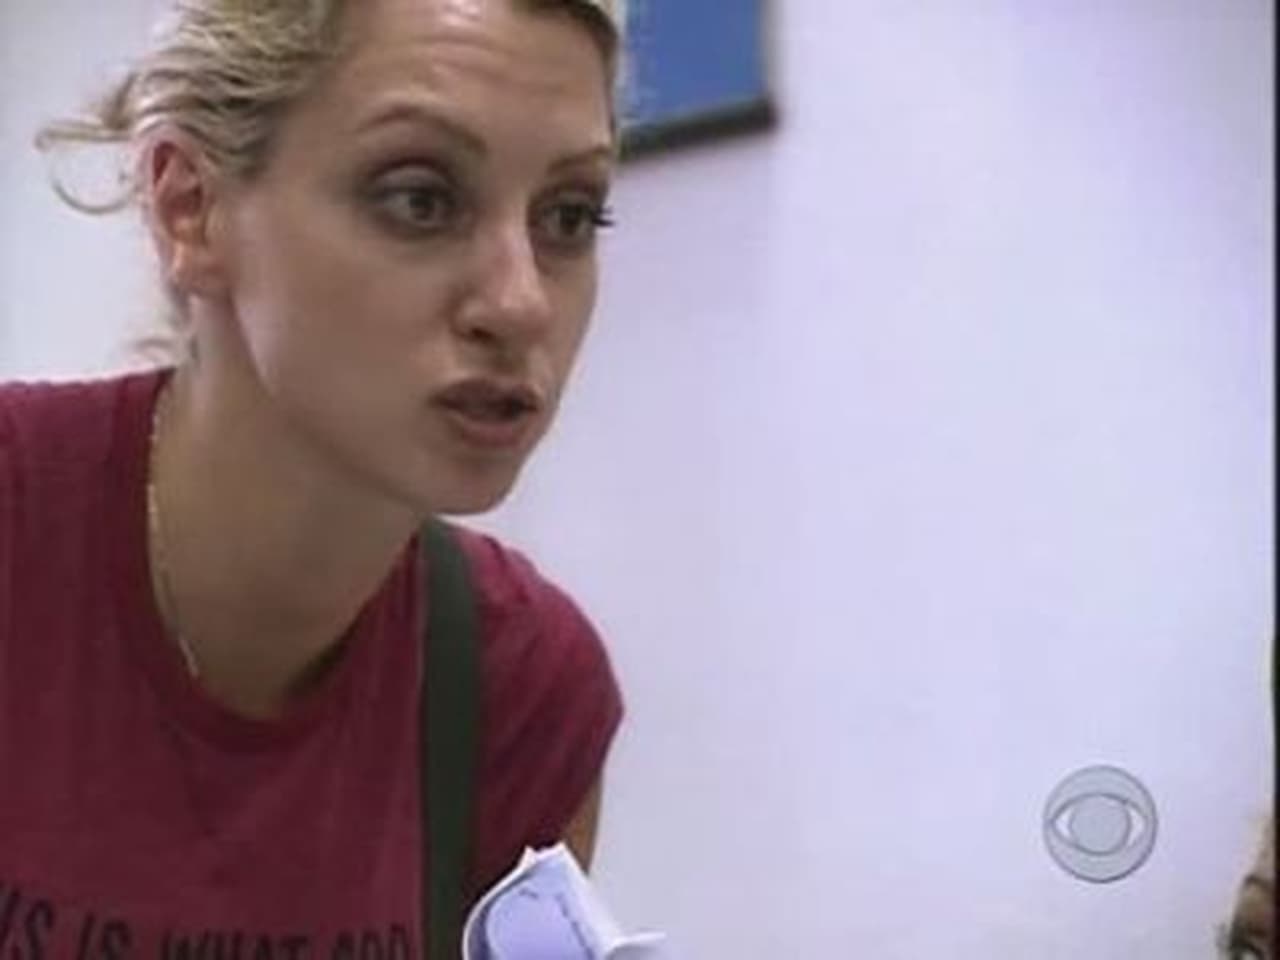 The Amazing Race - Season 11 Episode 7 : If I Were In Town, I Would Ask For Your Number (1)